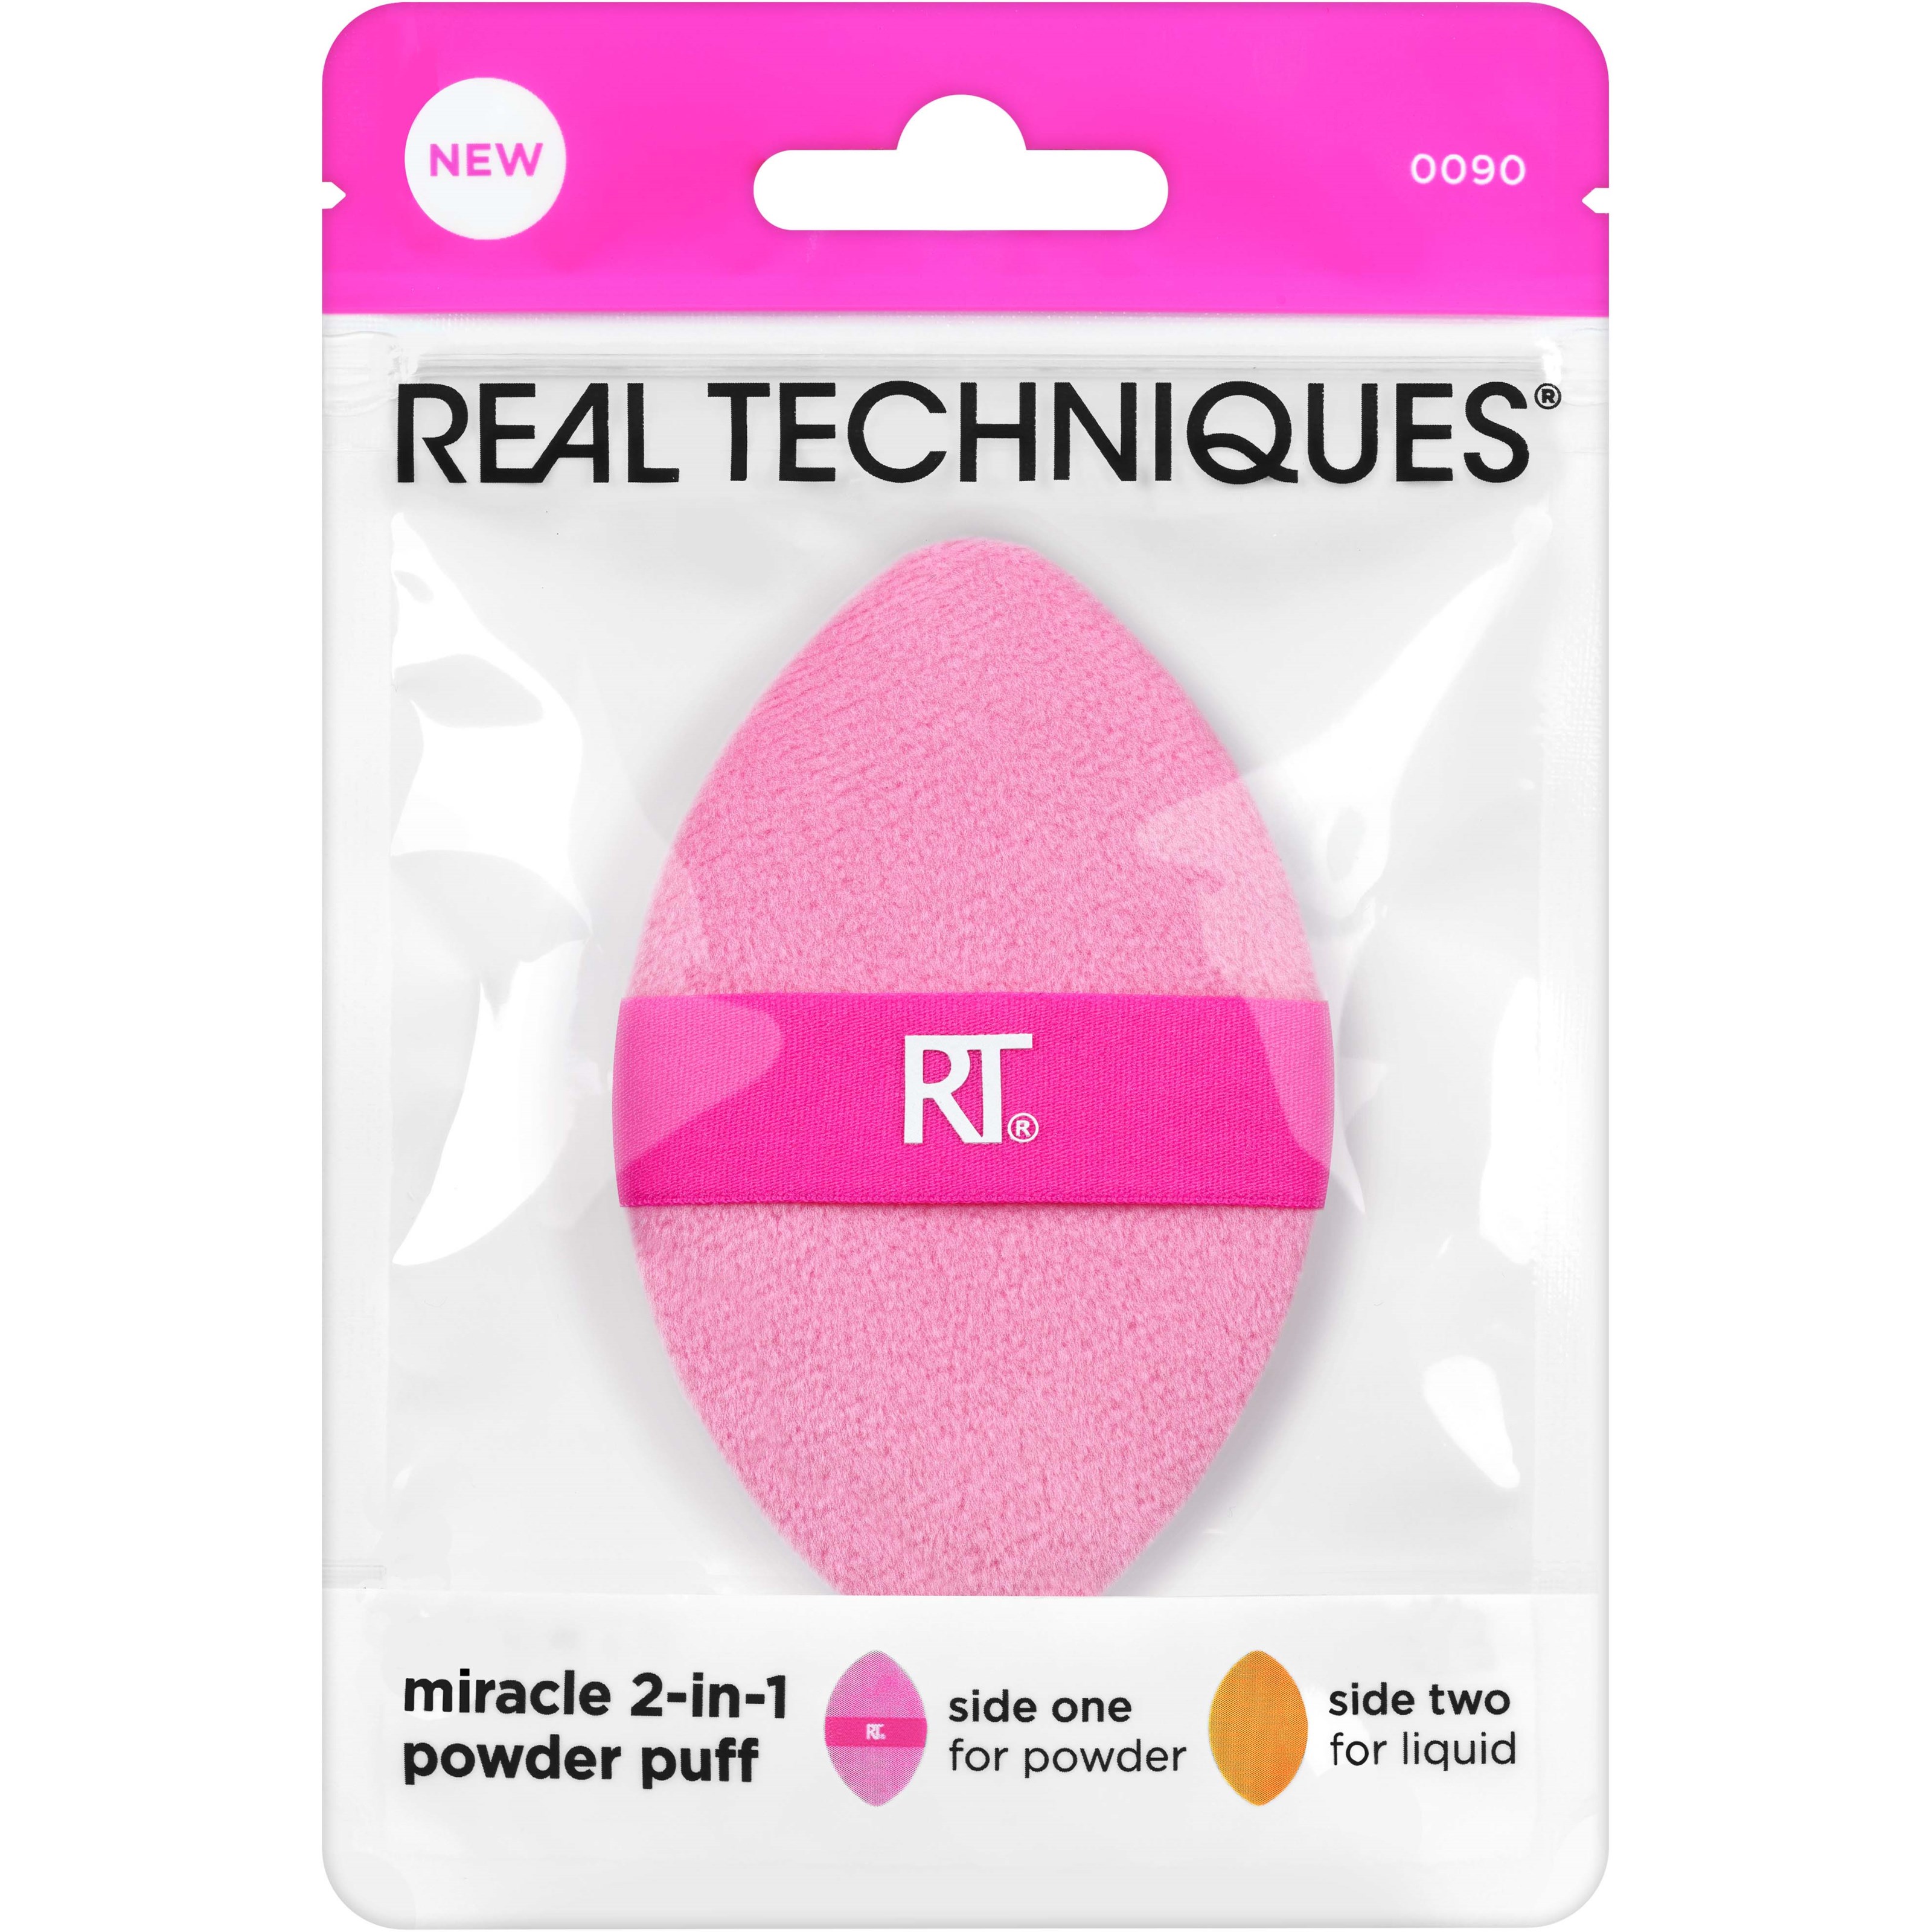 Läs mer om Real Techniques 2 in 1 Miracle Powder Puff